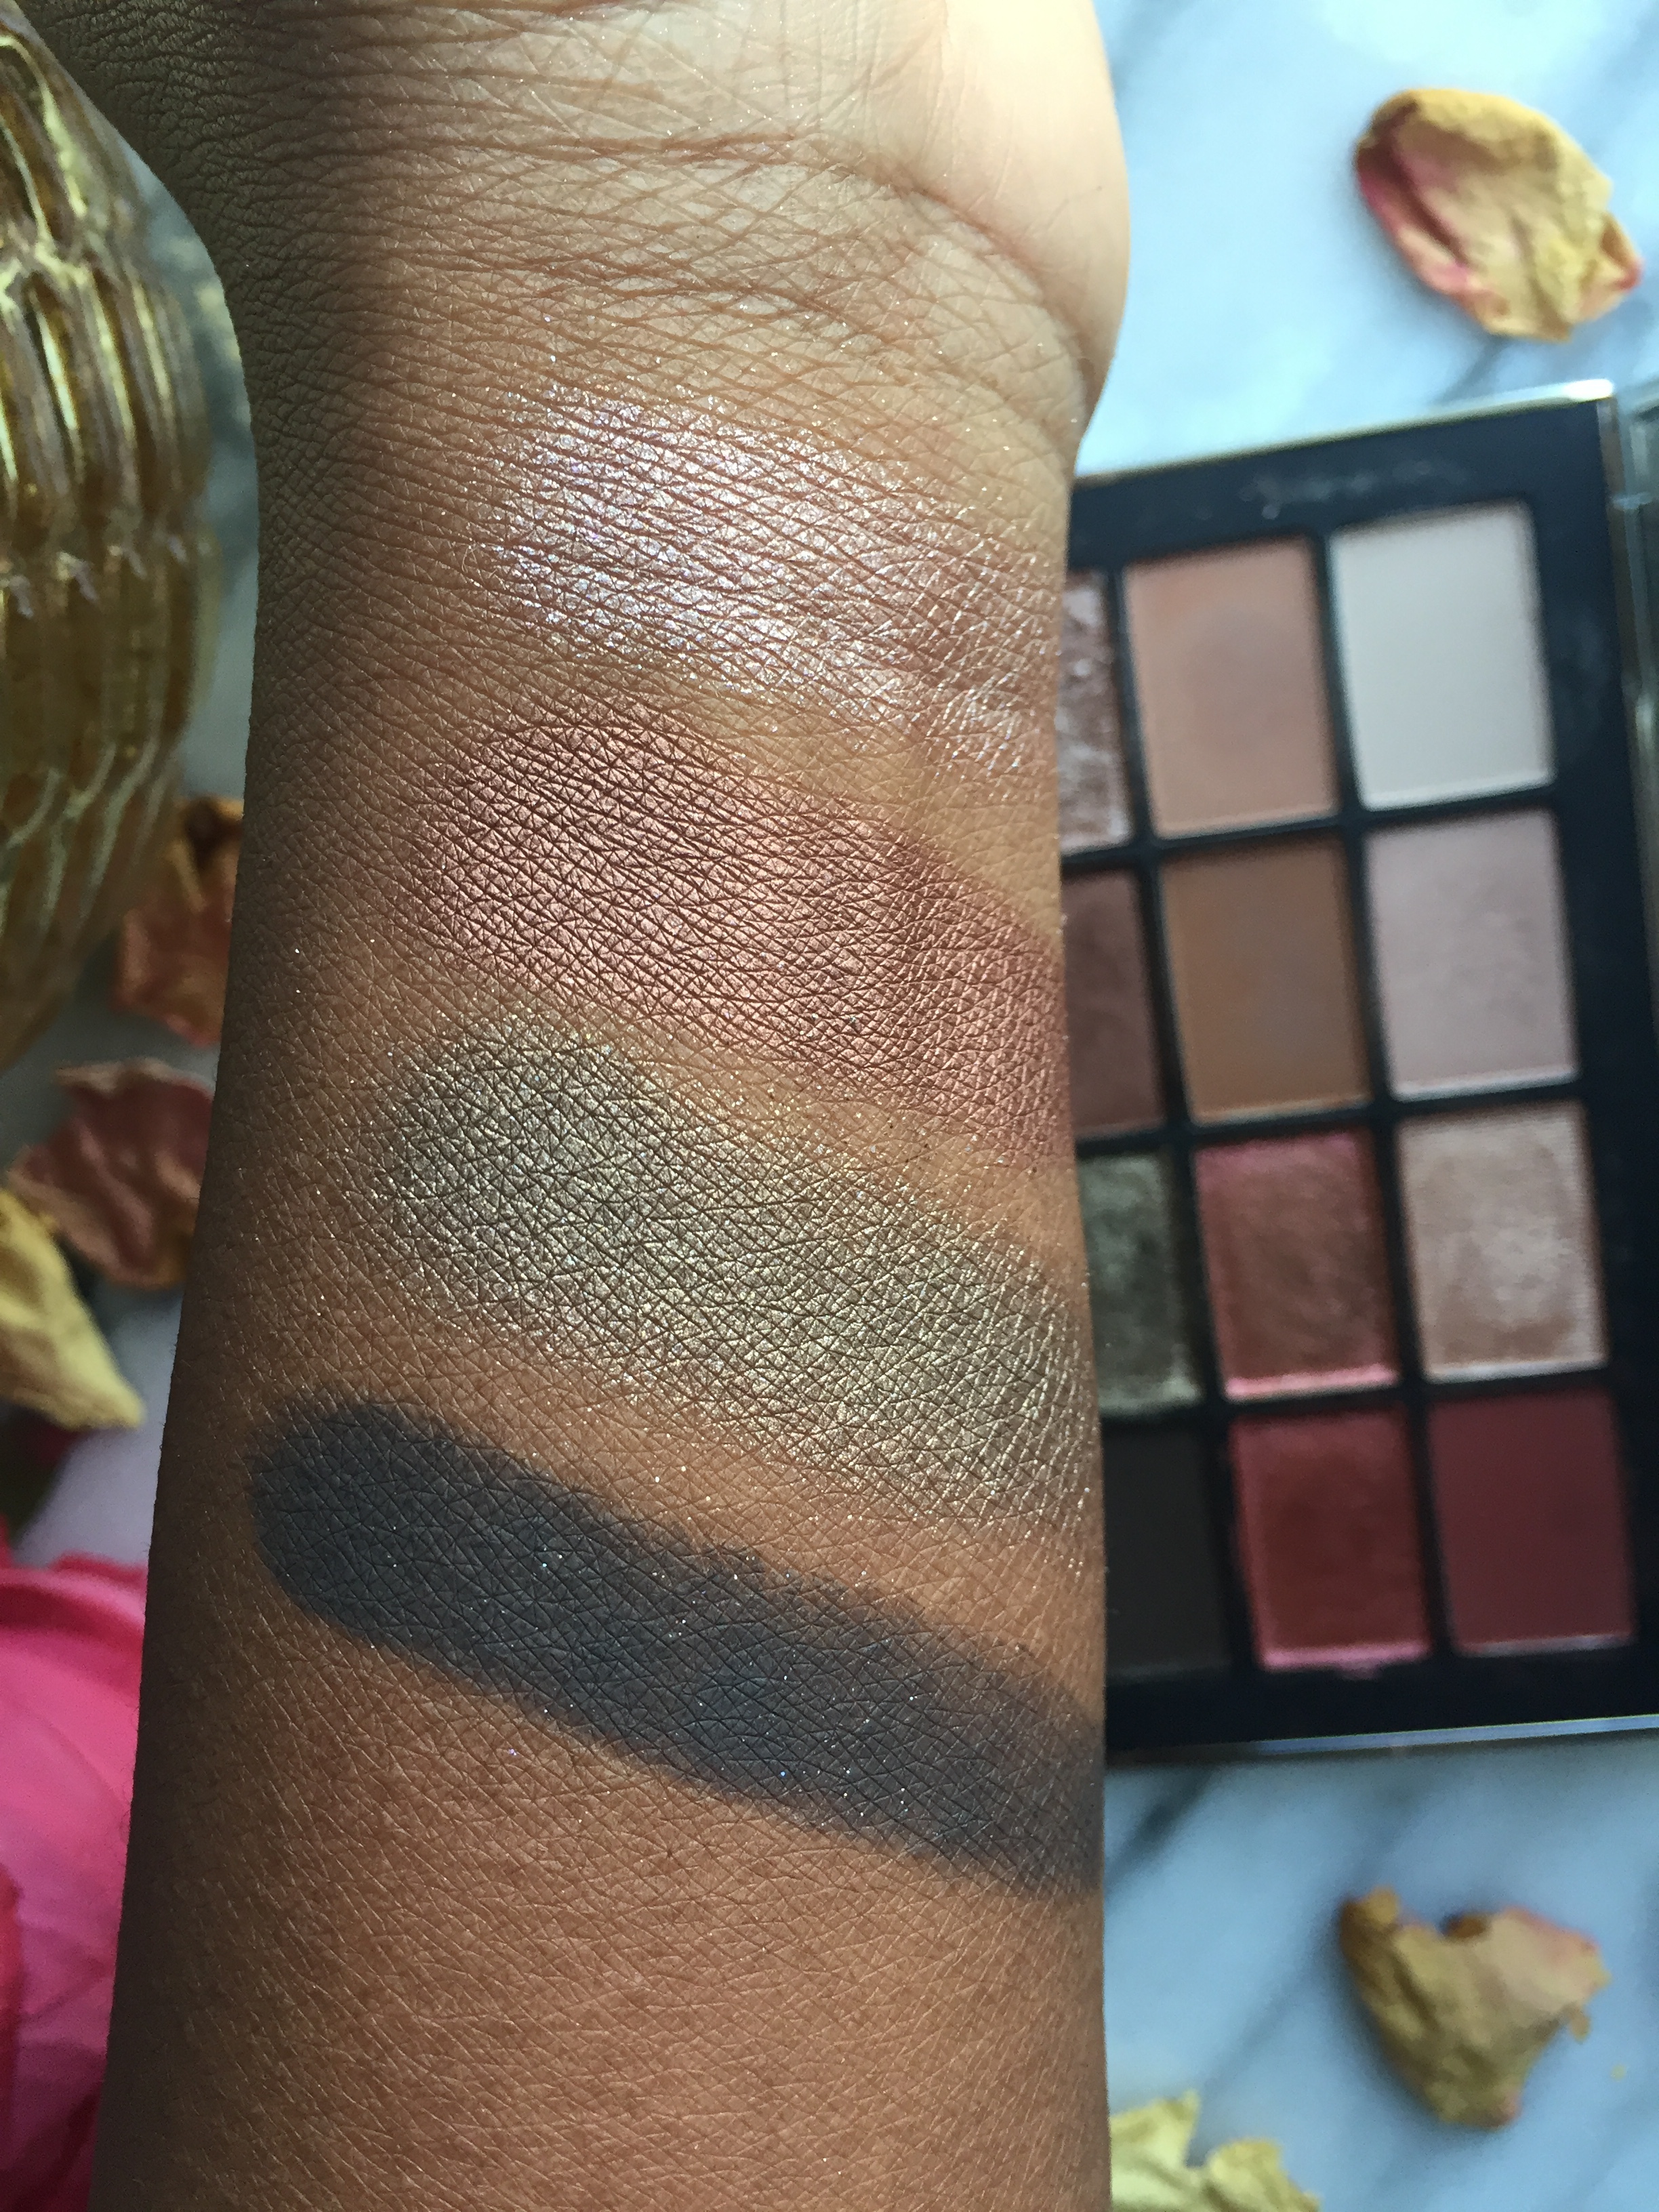 Brush Swatches W/Primer L to R: Coconut Grove, Fallen Star, LaLa, Shooting Star